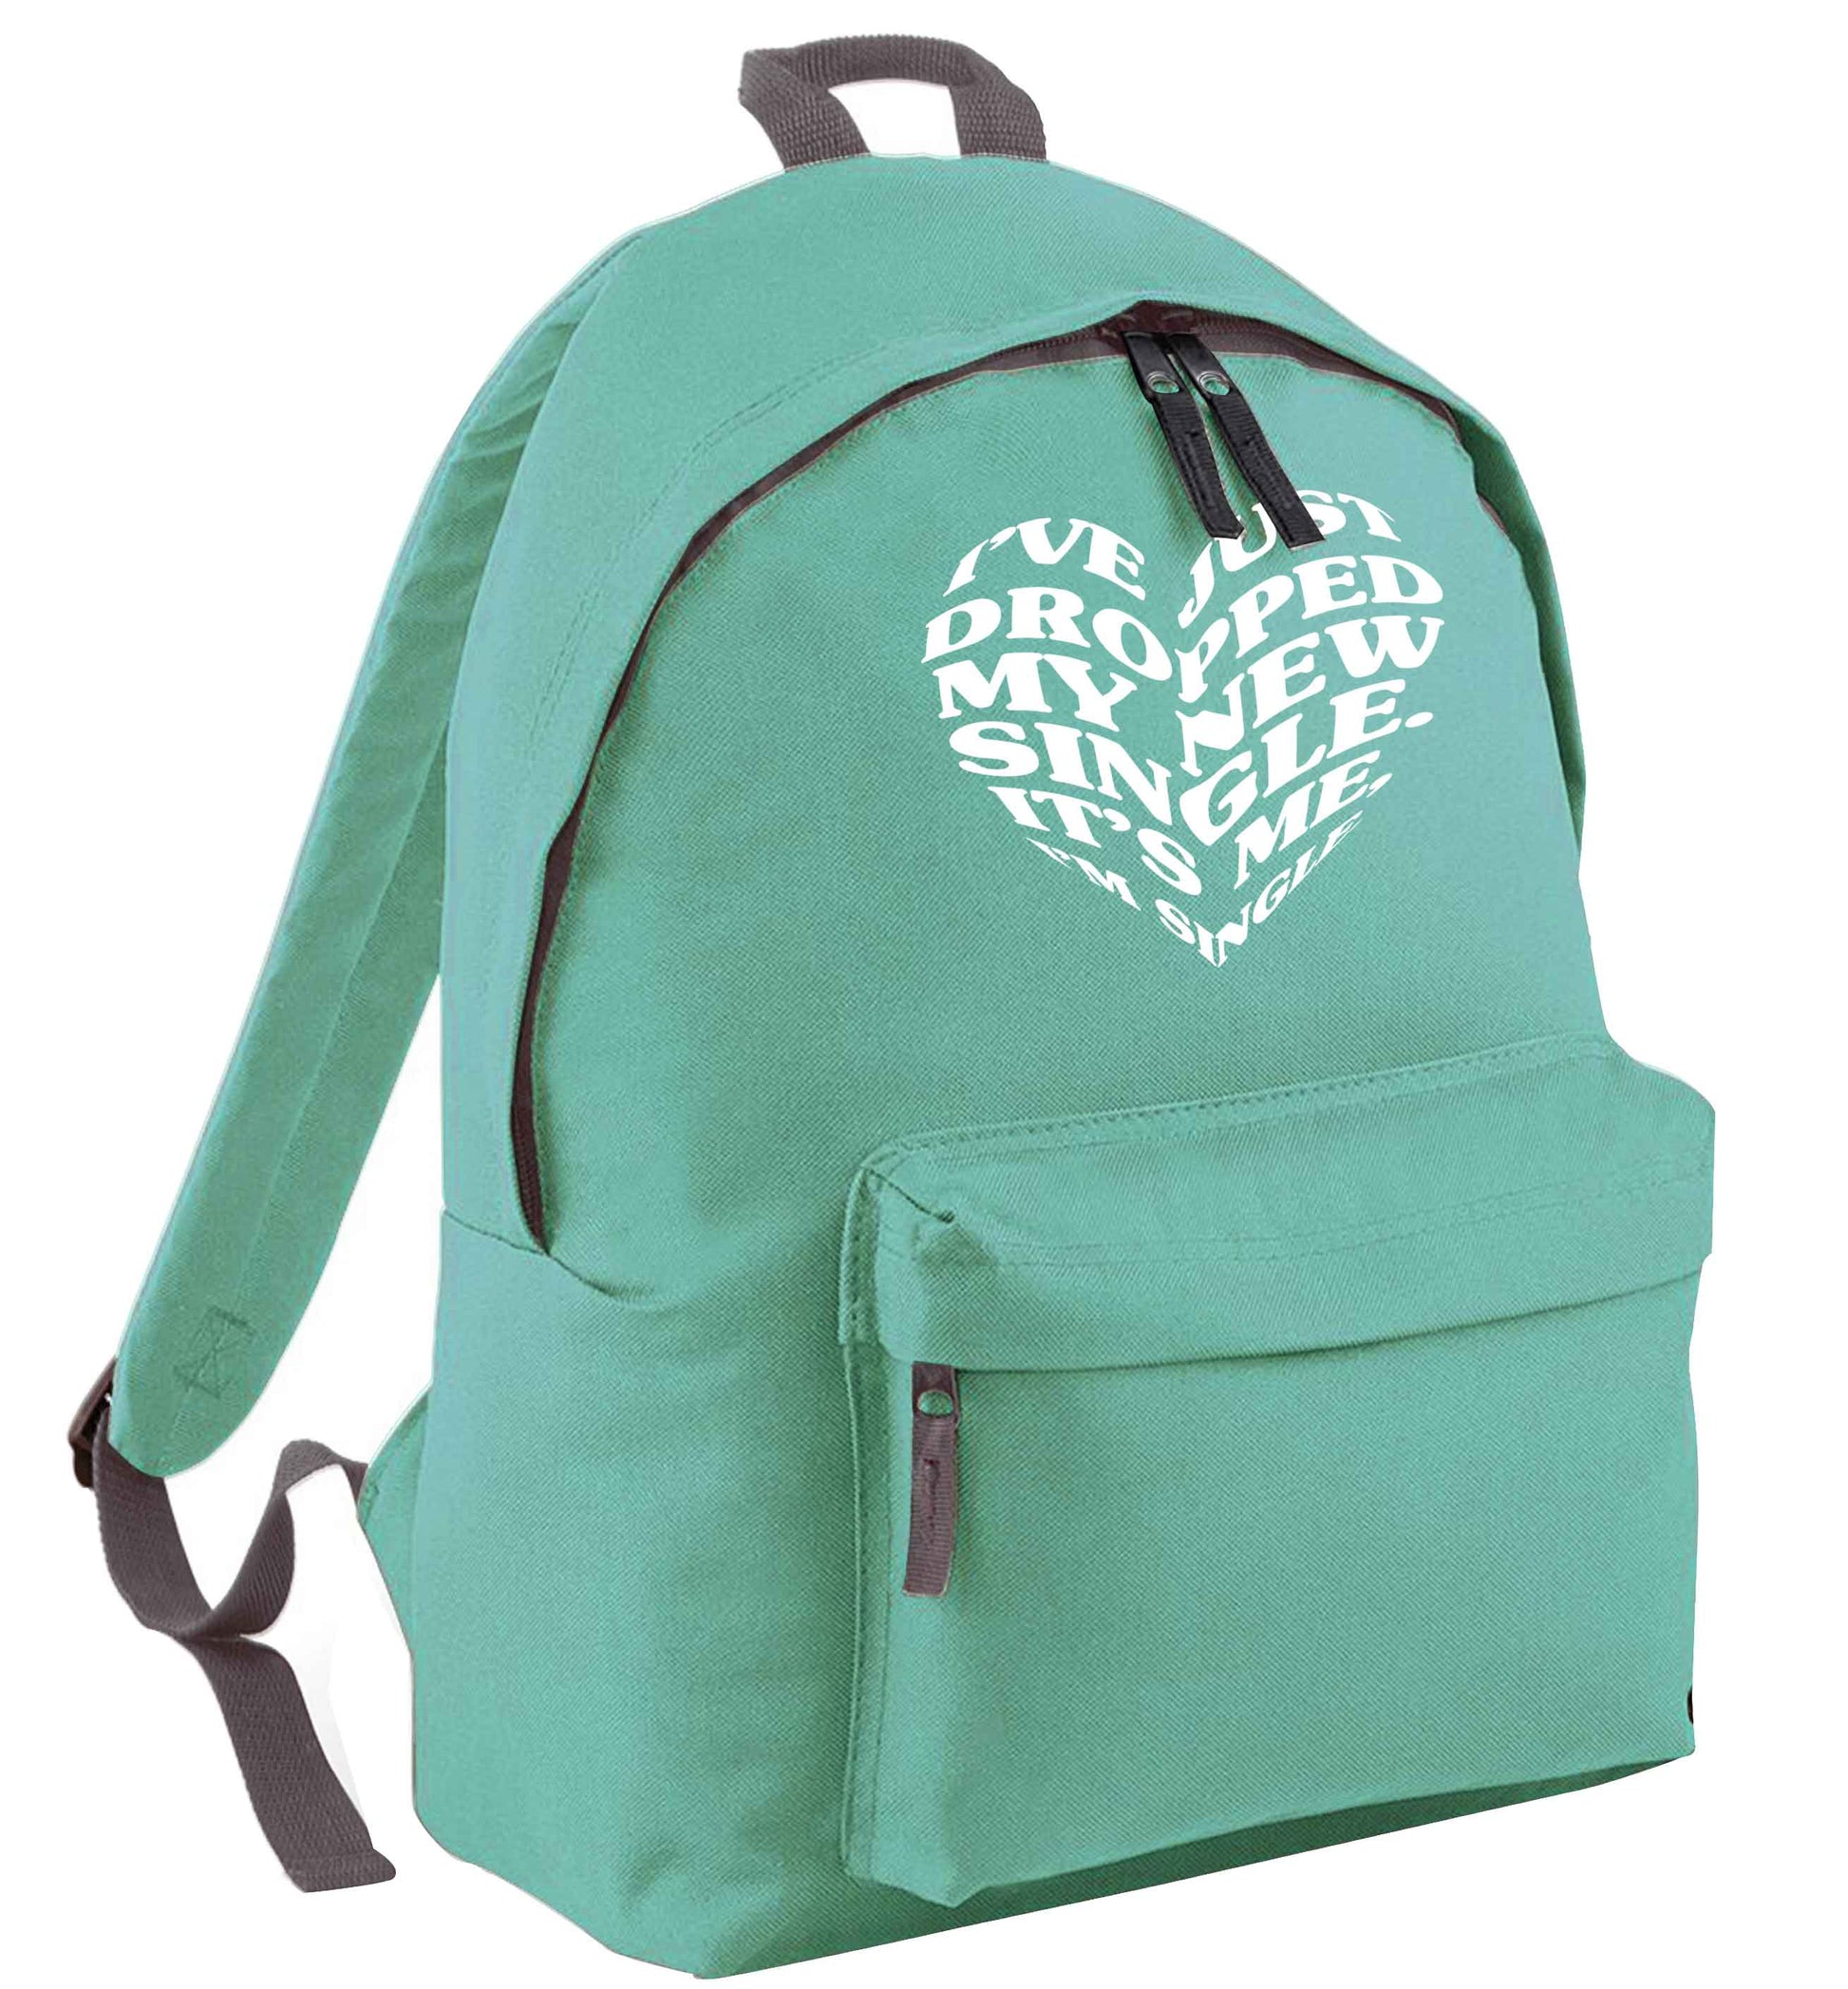 I've just dropped my new single it's me I'm single mint adults backpack